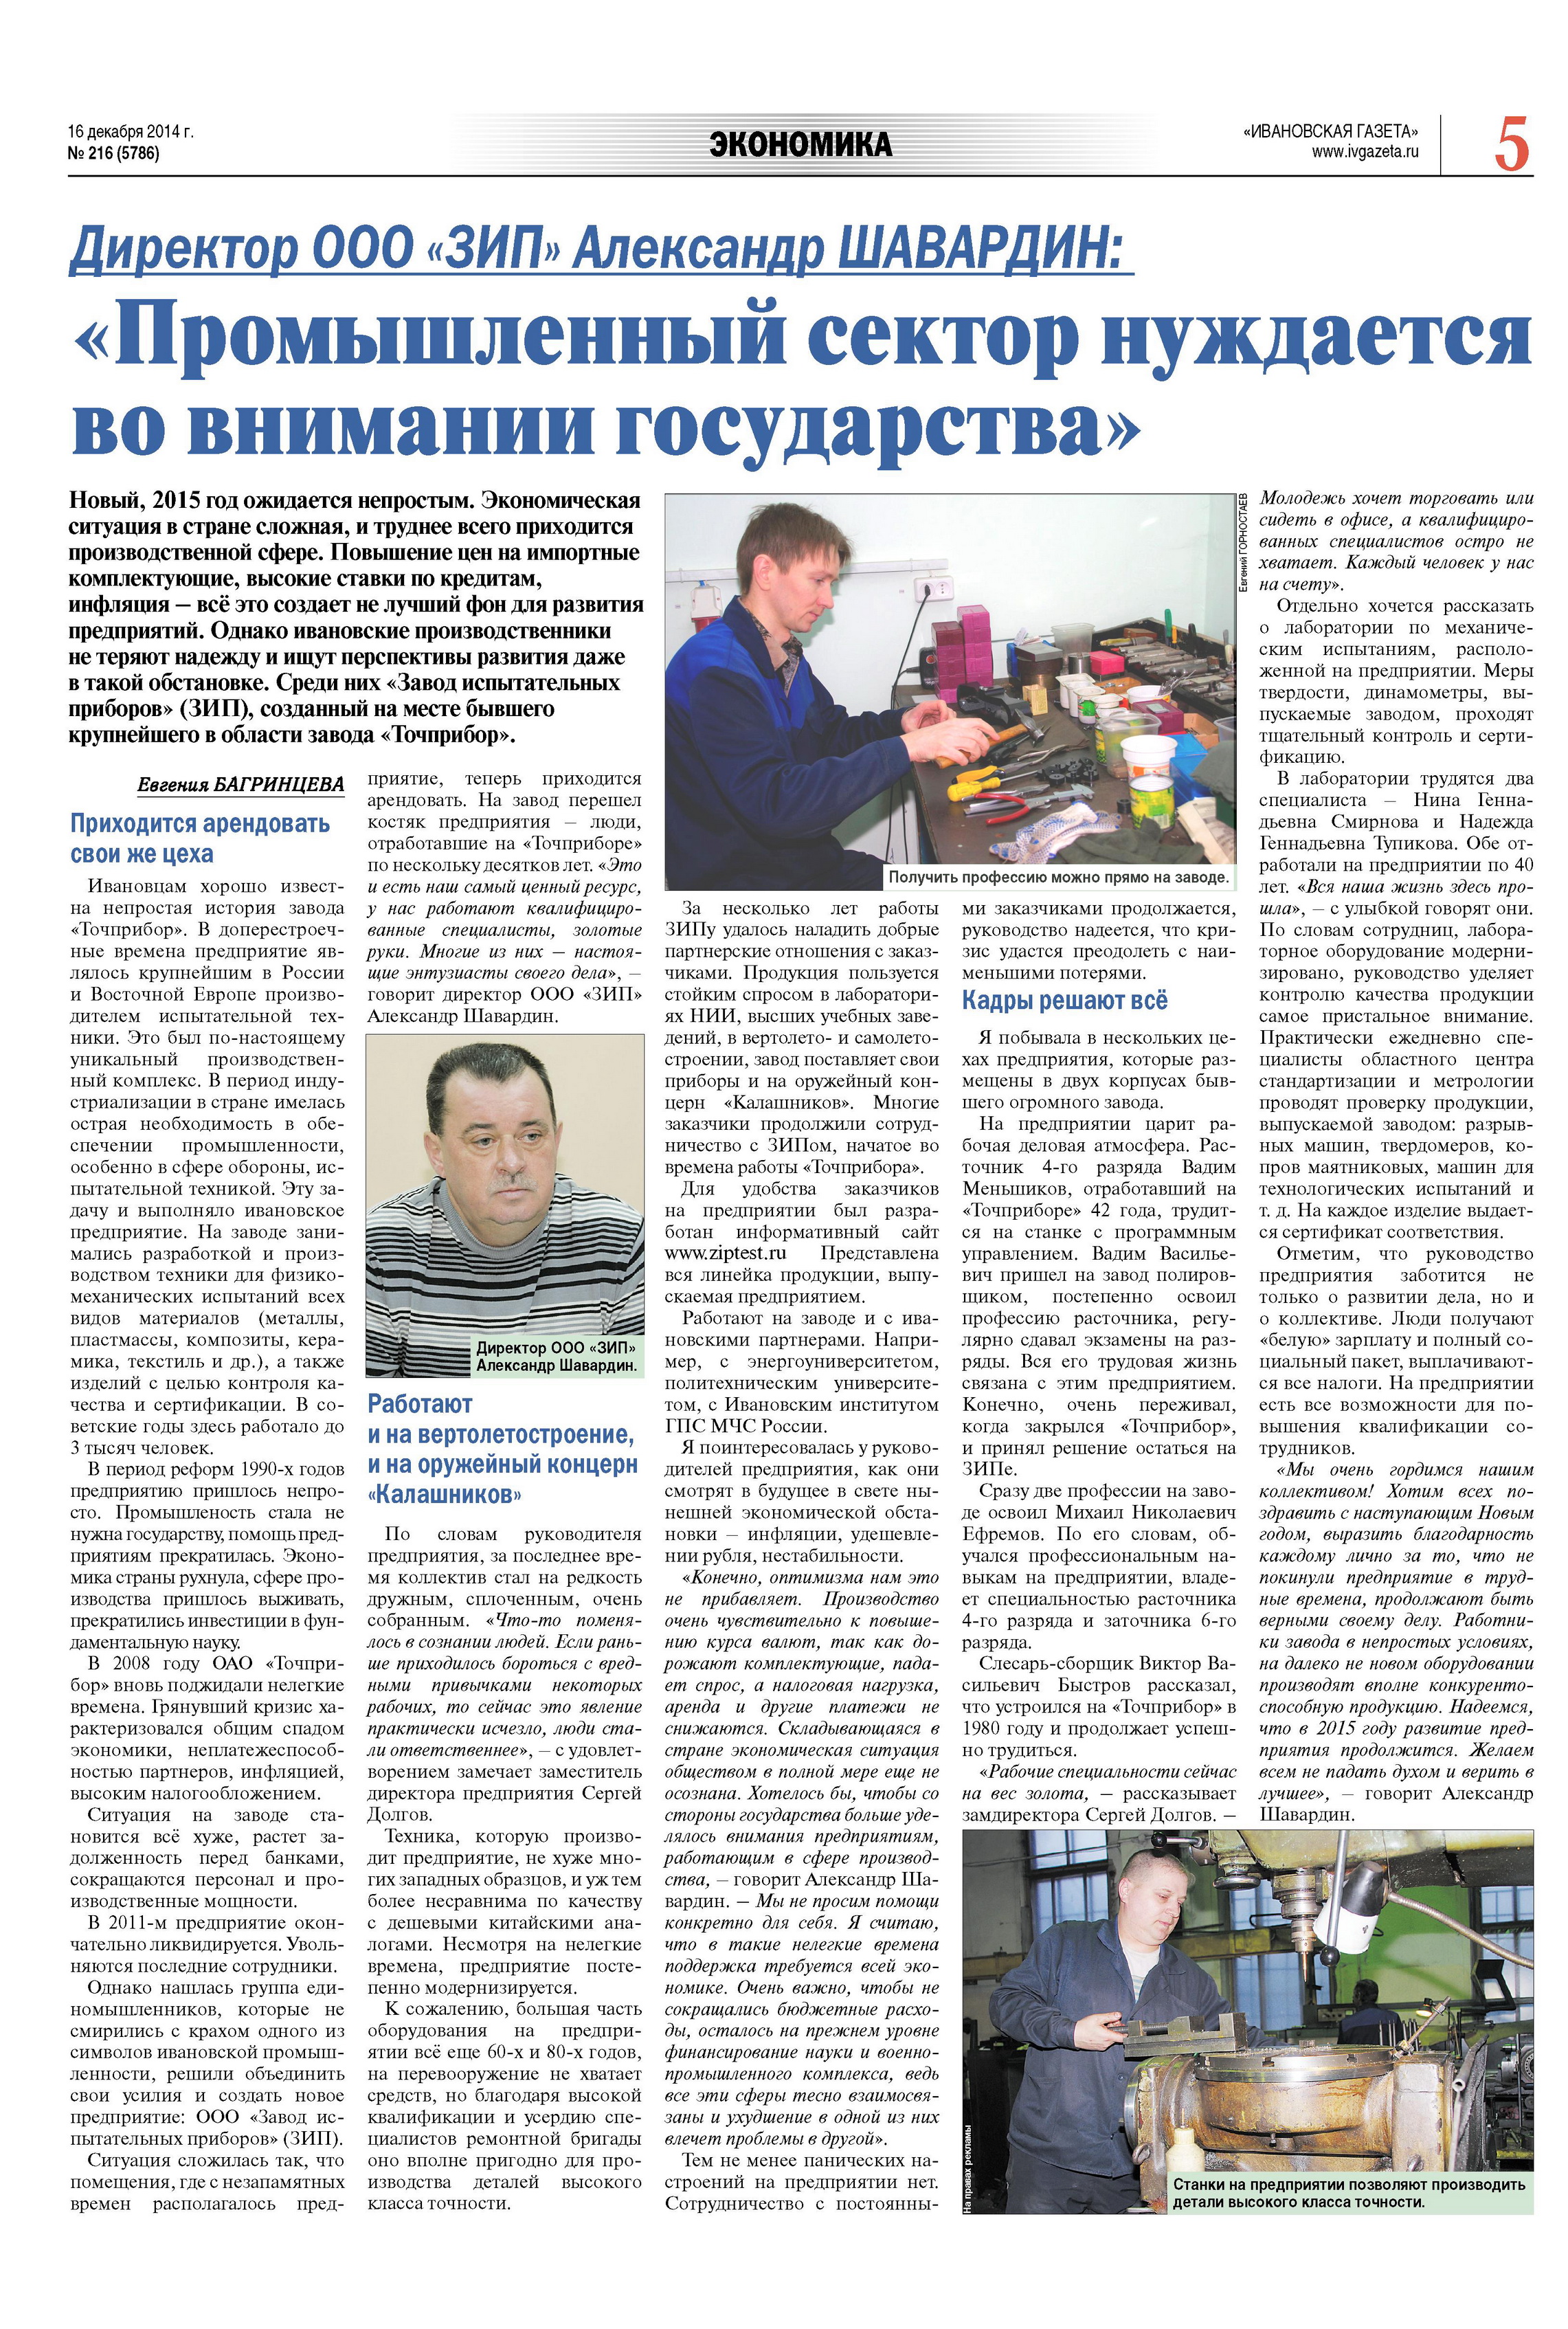 article in the Ivanovo newspaper